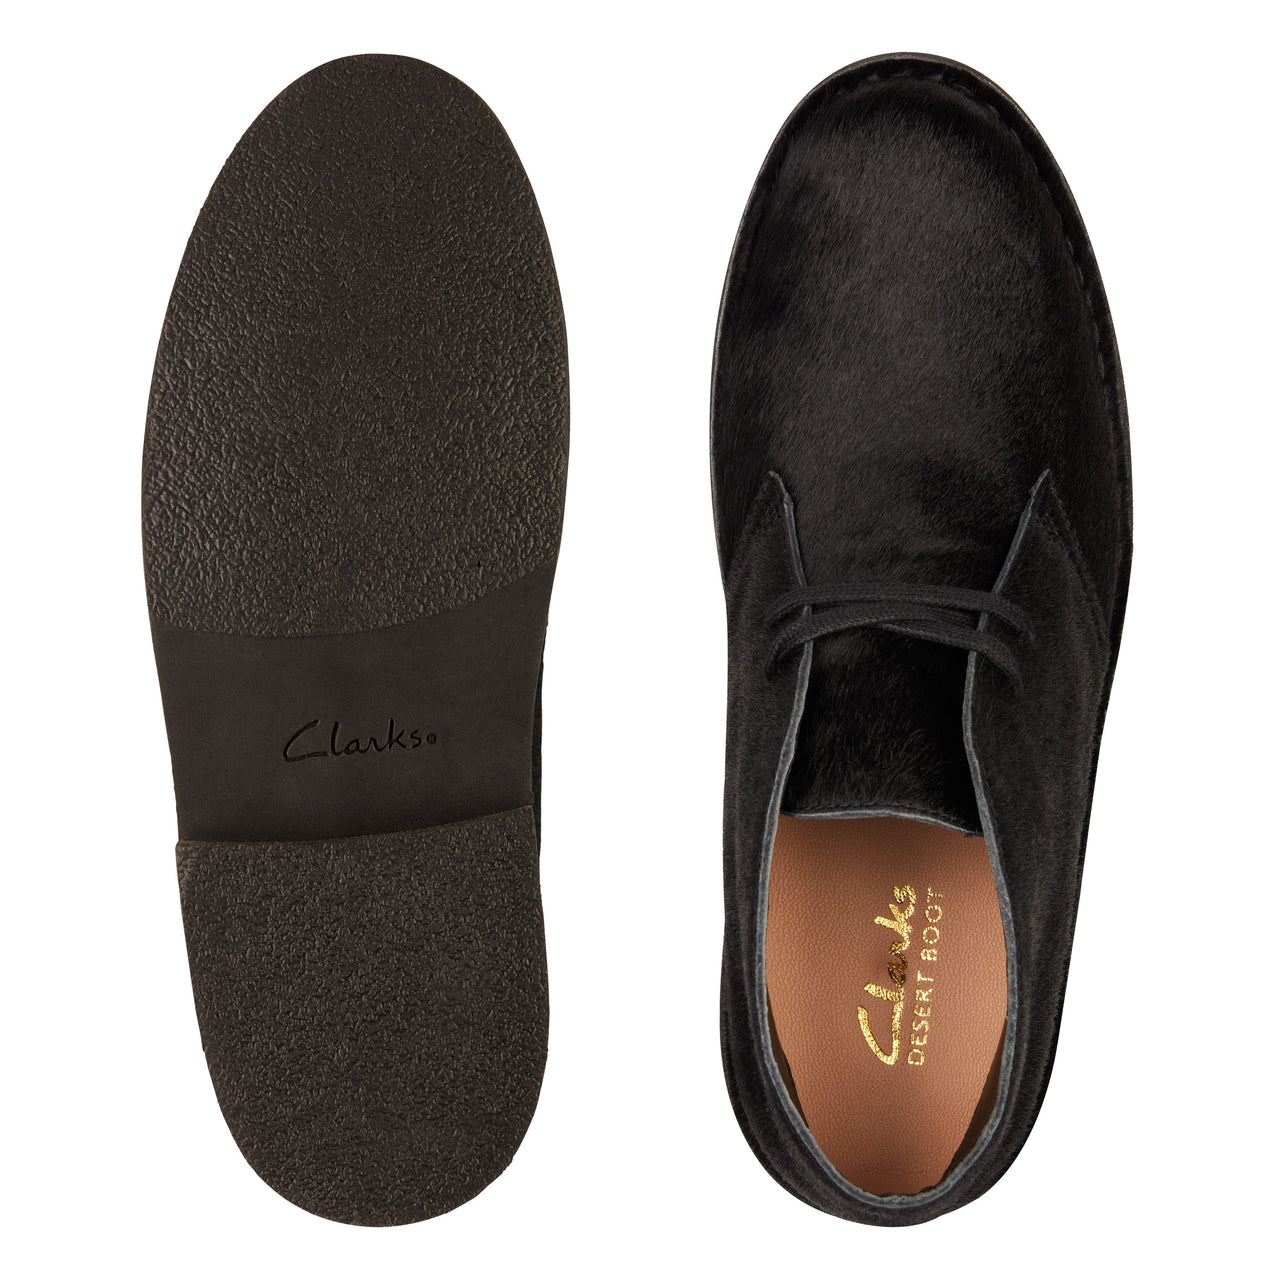 Classic Clarks Womens Desert Boot 2 in Black perfect for any season and occasion